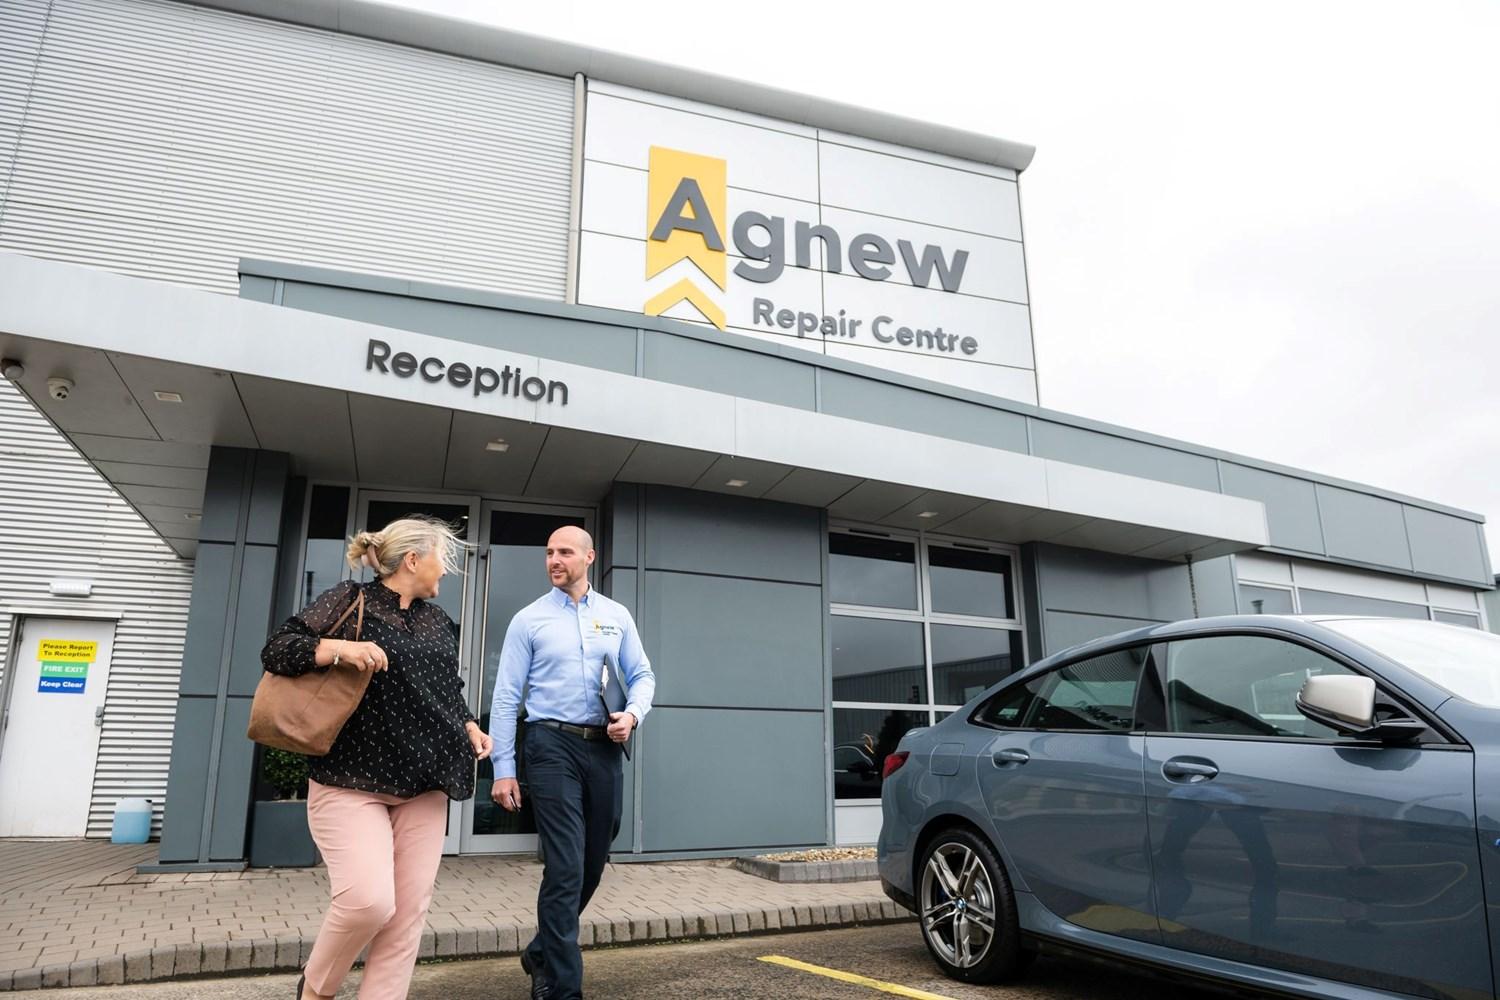 Vehicle Damage Assessor talks to customer about repairs to be made to vehicle outside the main reception entrance of Agnew Repair Centre, Belfast, Northern Ireland.